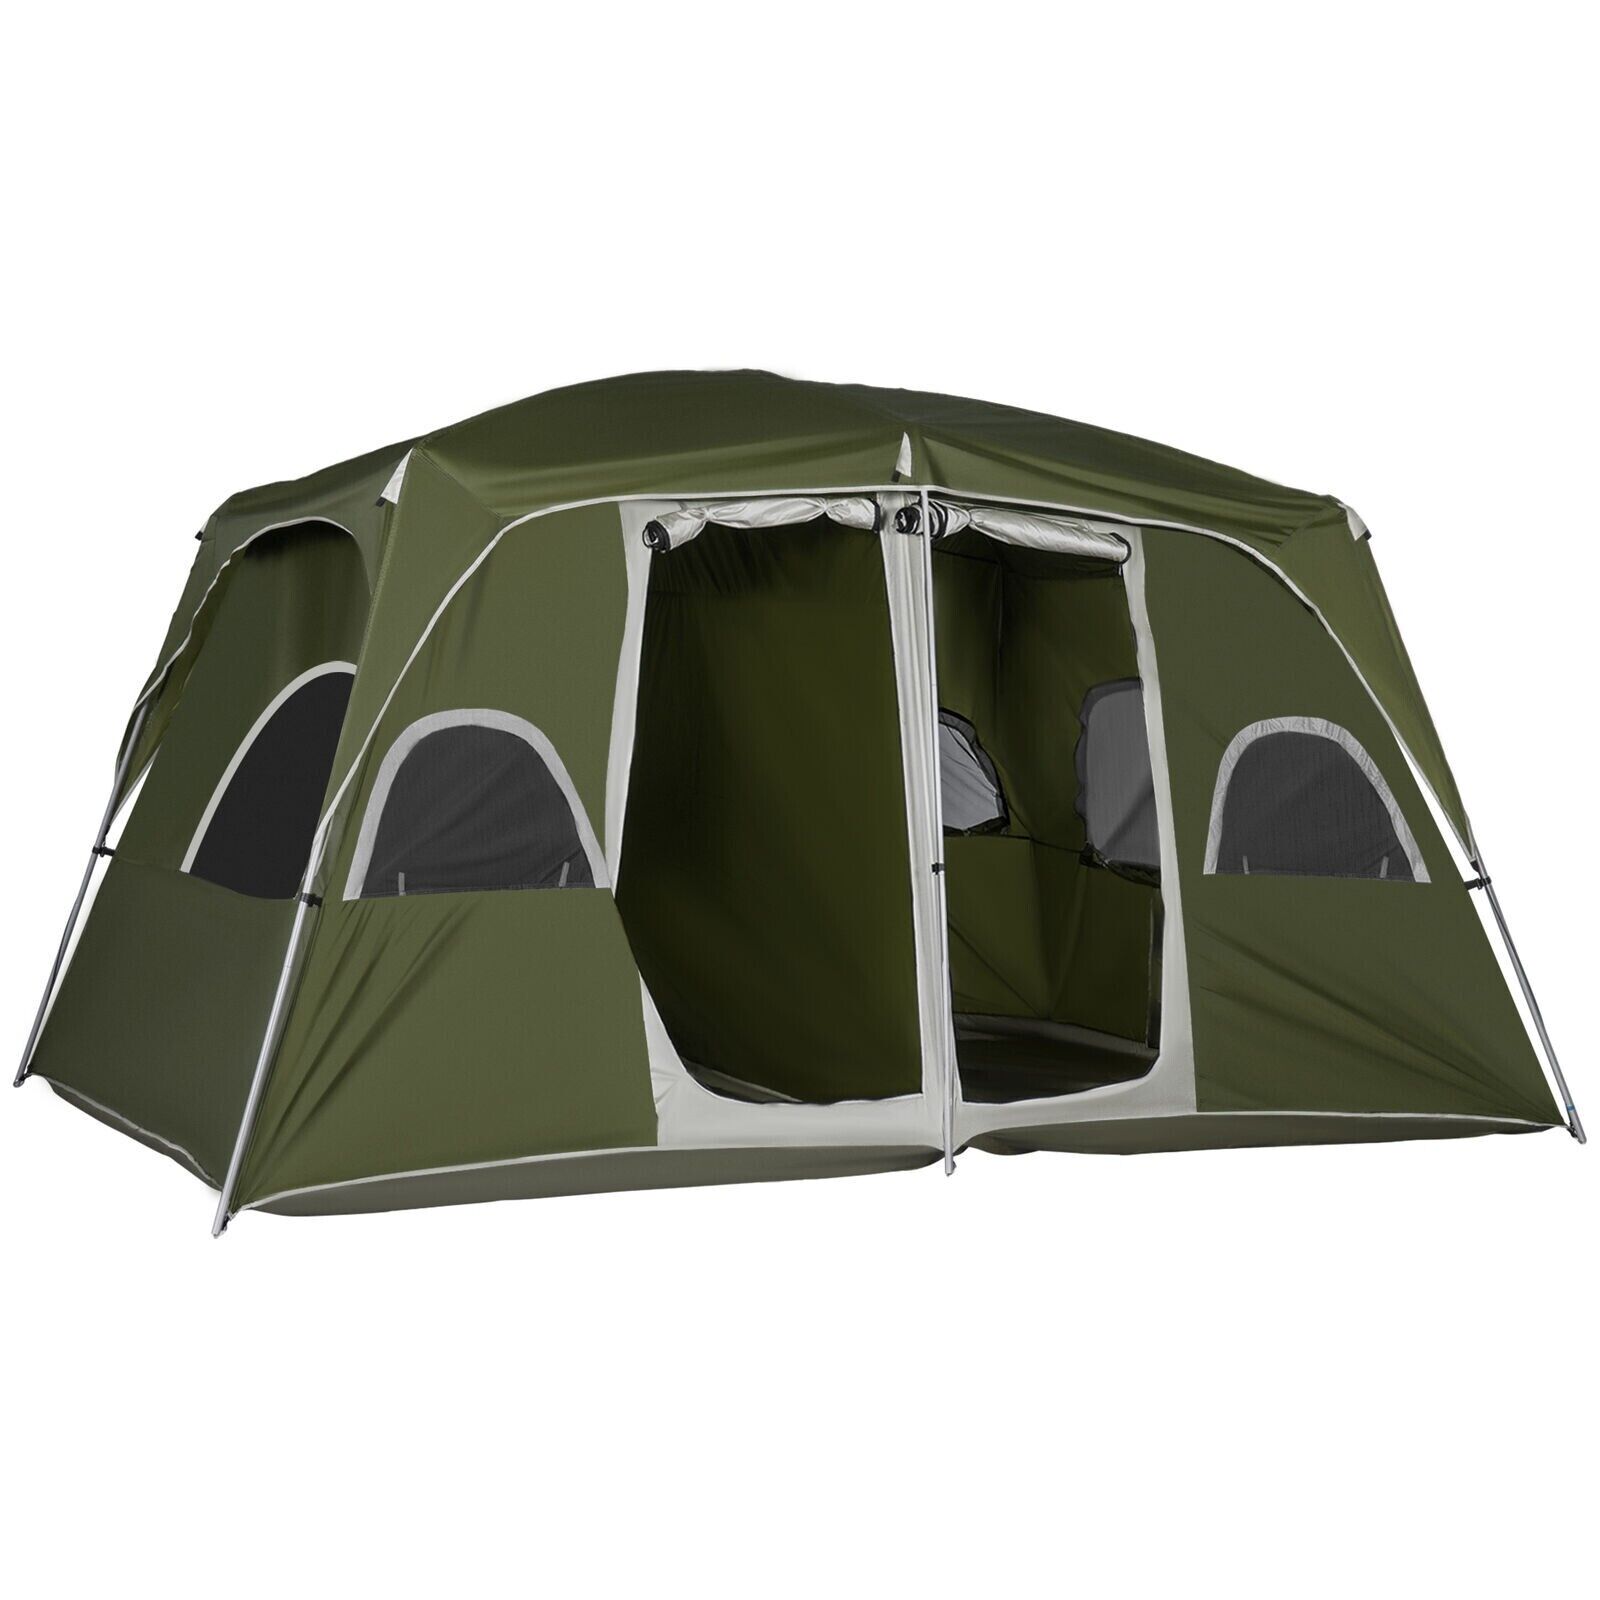 Outsunny Camping Tent, Family Tent 4-8 Person 2 Room Easy Set Up, Green